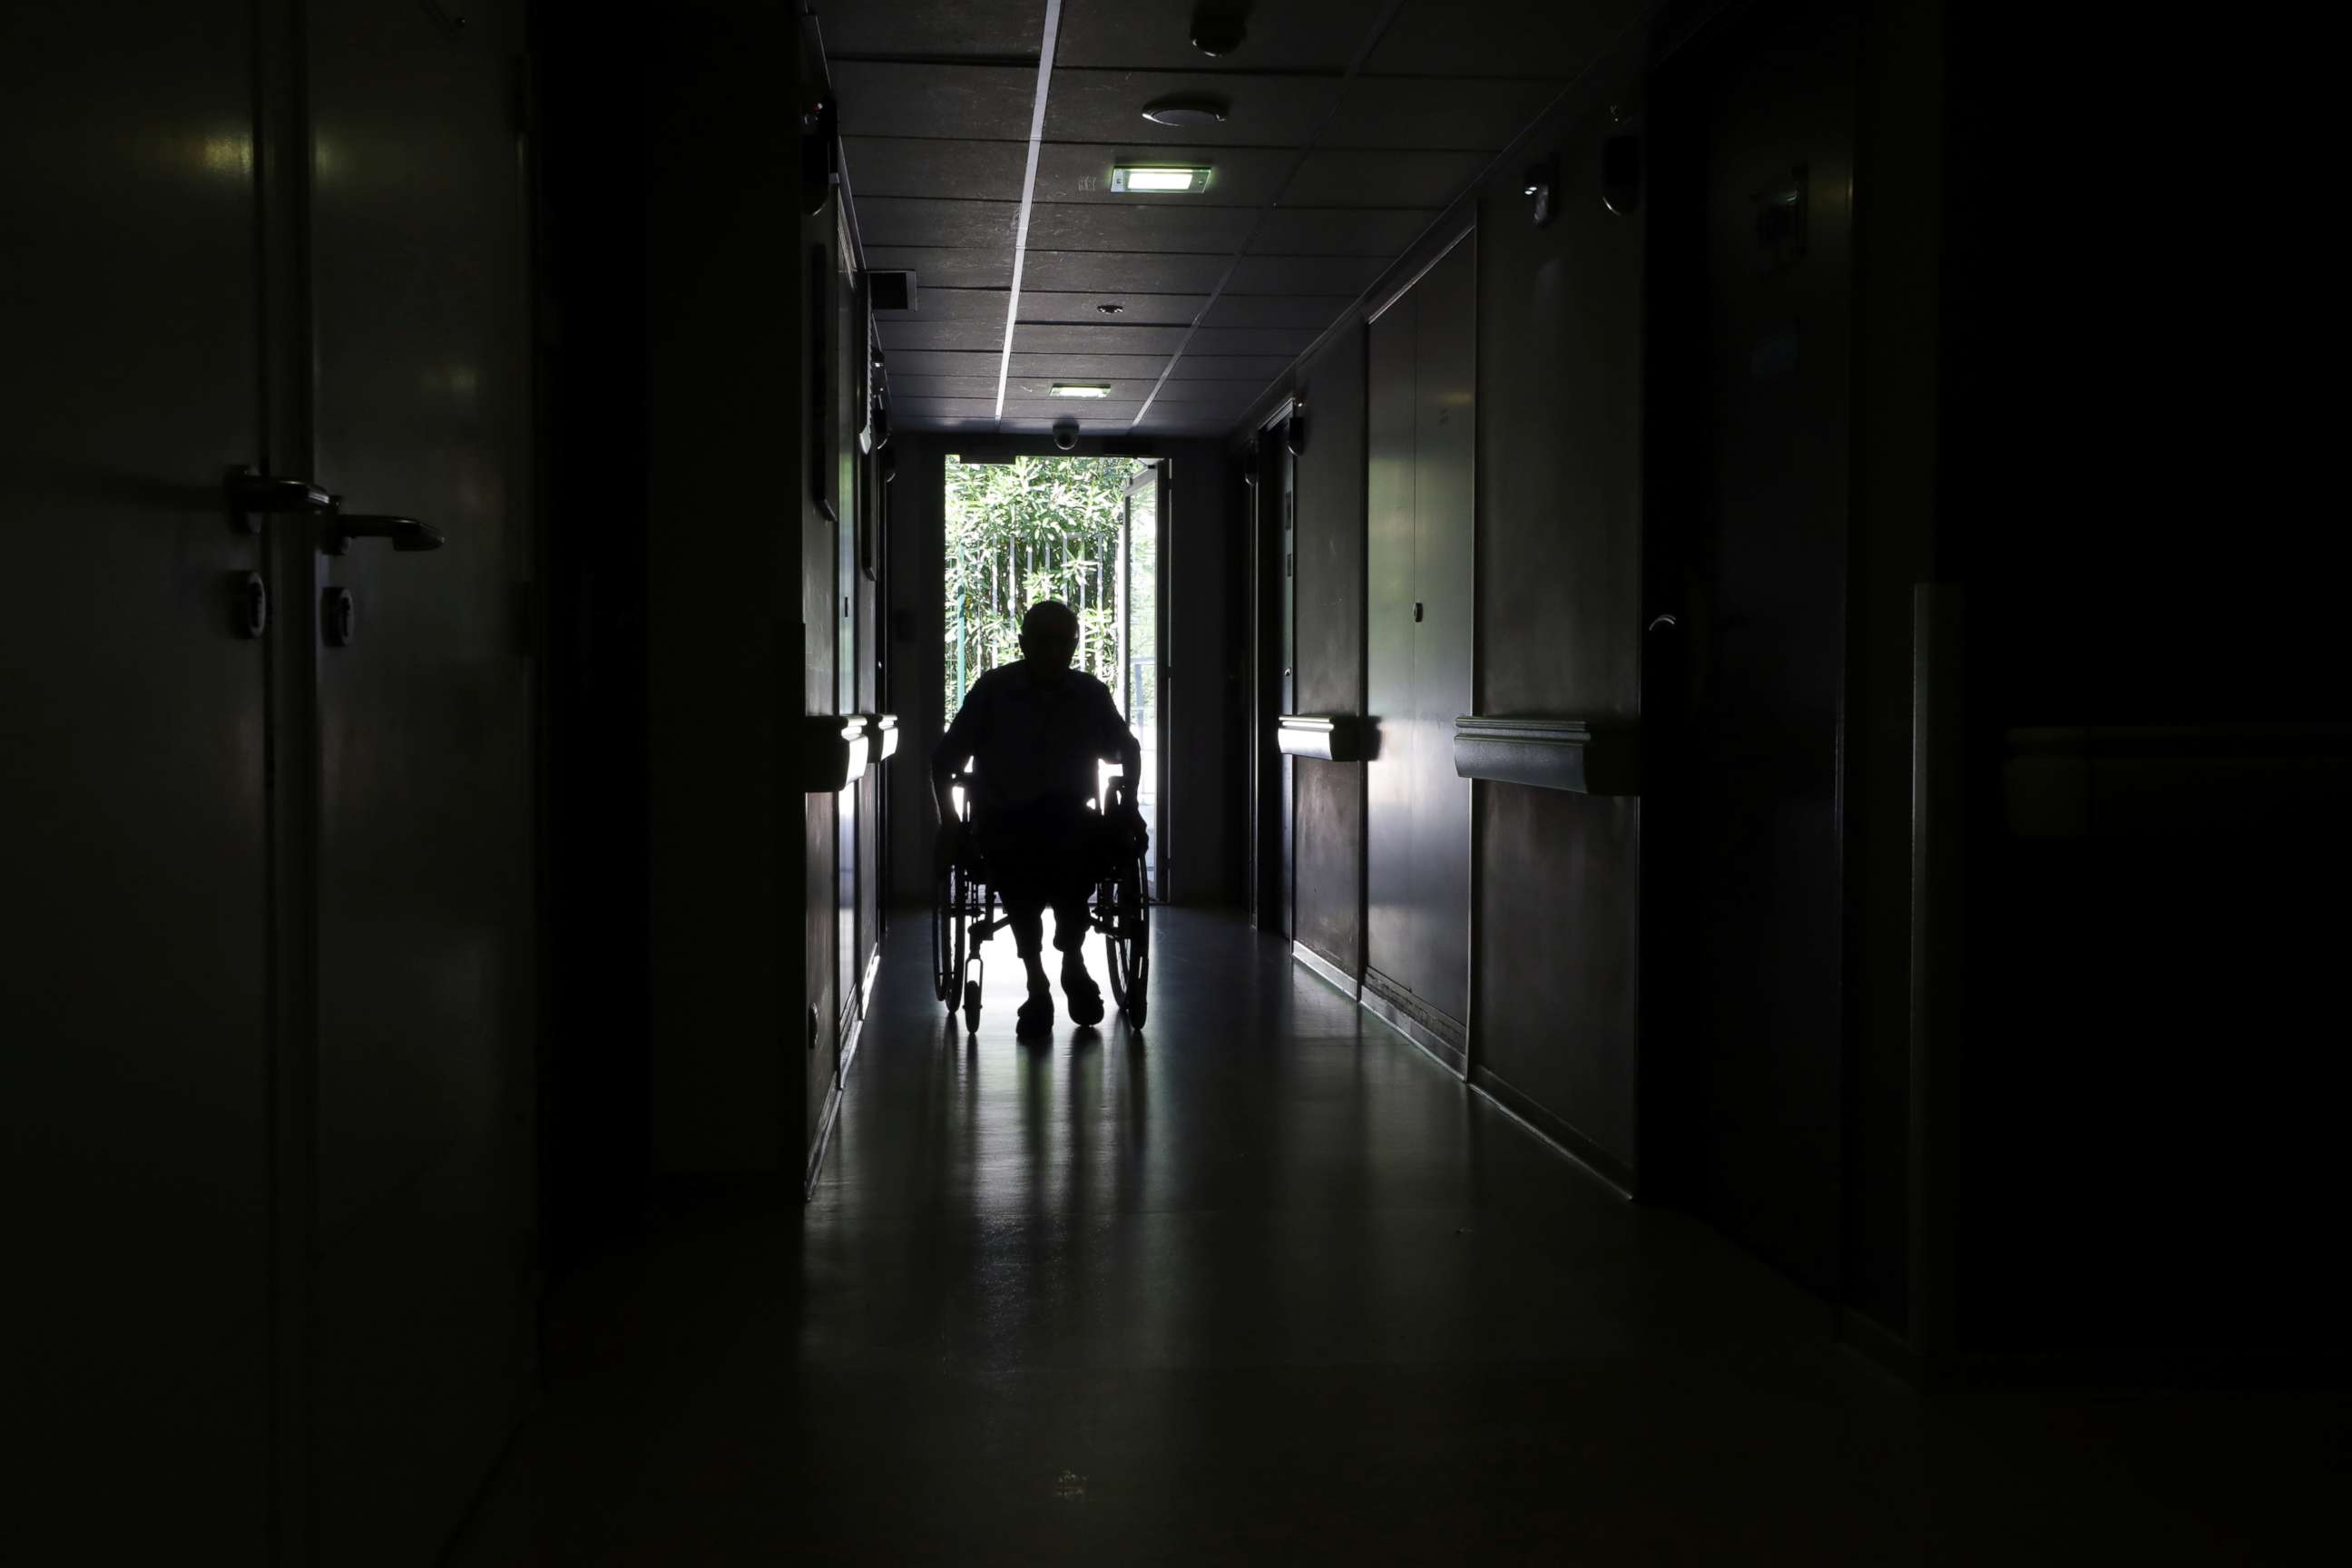 PHOTO: A resident on a wheelchair is seen in a corridor at "Les Figuiers" retirement home (Ehpad - Housing Establishment for Dependant Elderly People) amid the coronavirus disease (COVID-19) outbreak in Villeneuve-Loubet, France, September 16, 2020.  